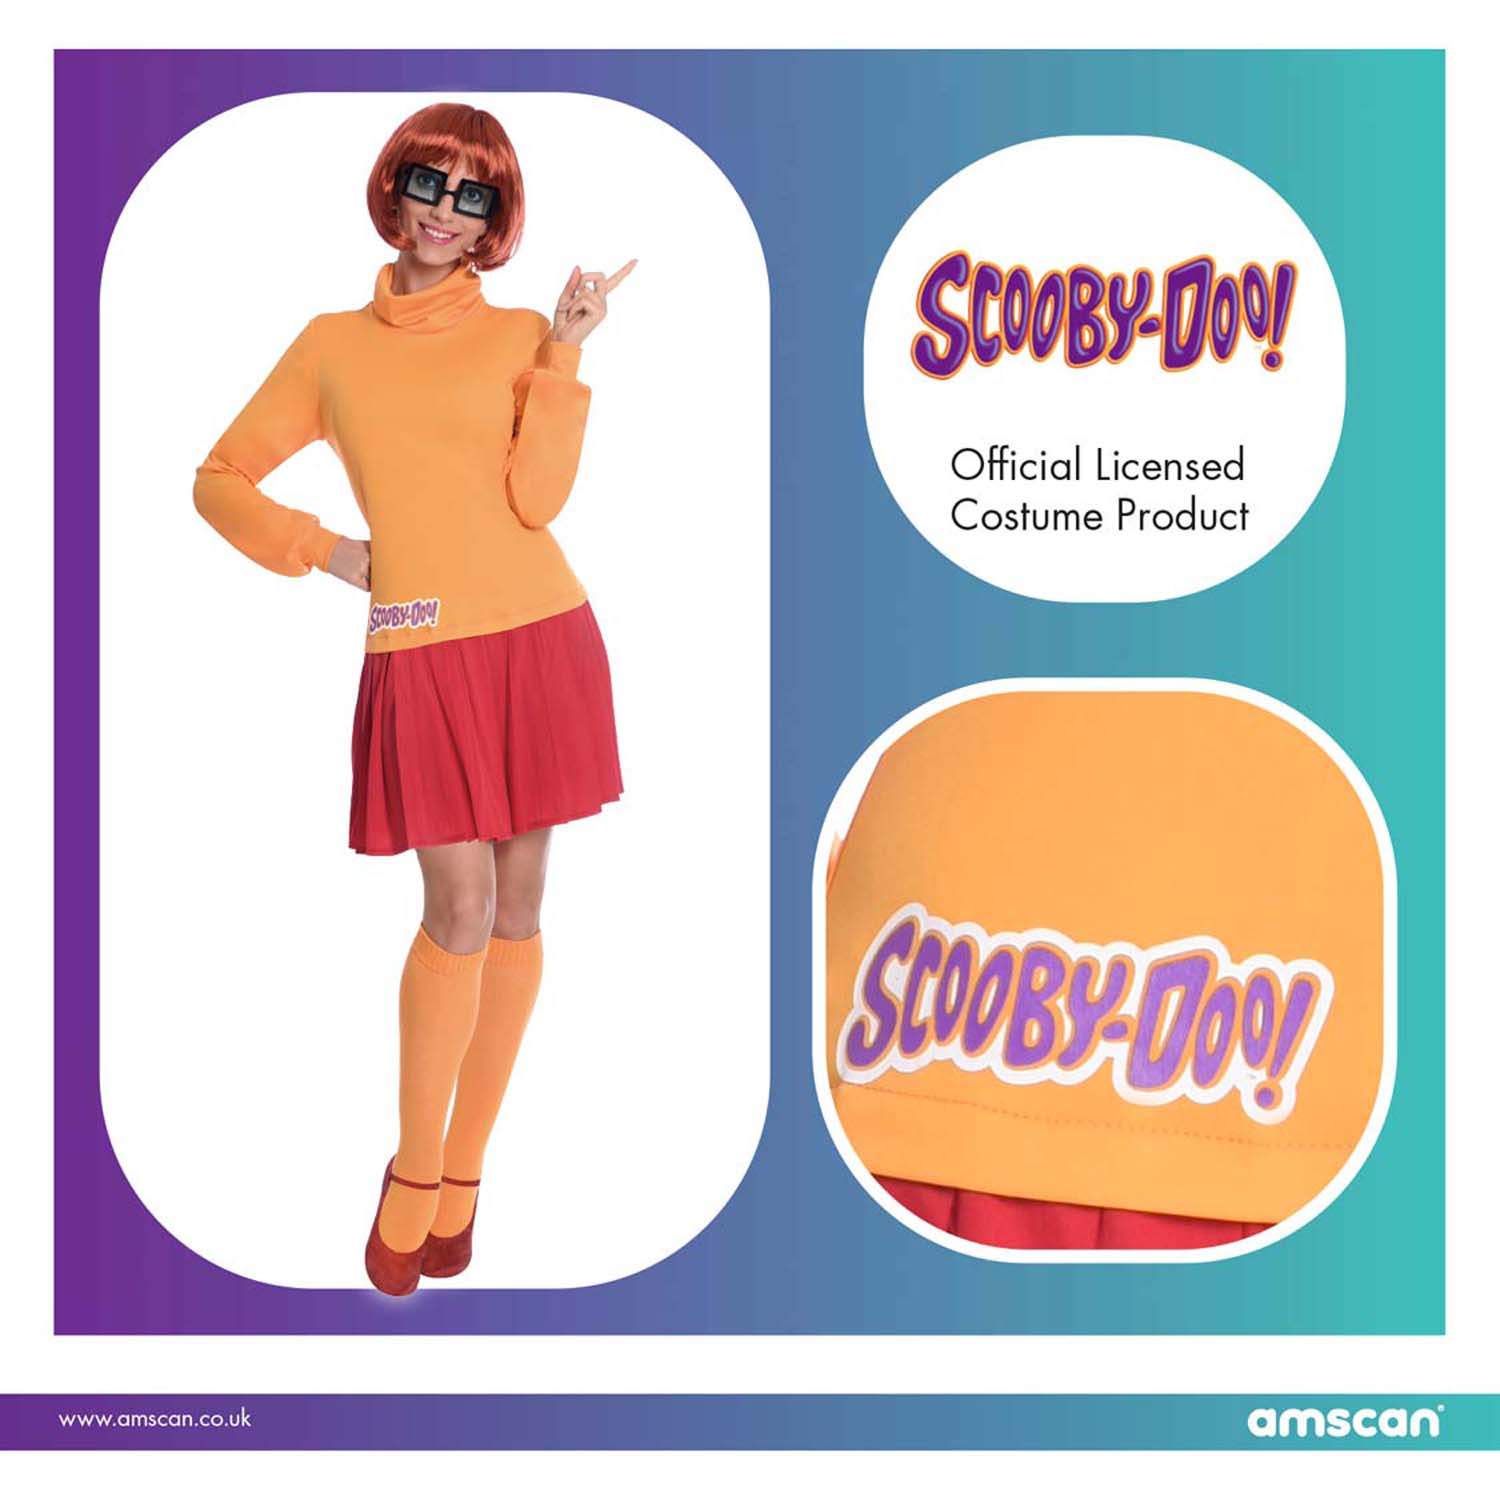 Velma costume for girls - Official Scooby Doo